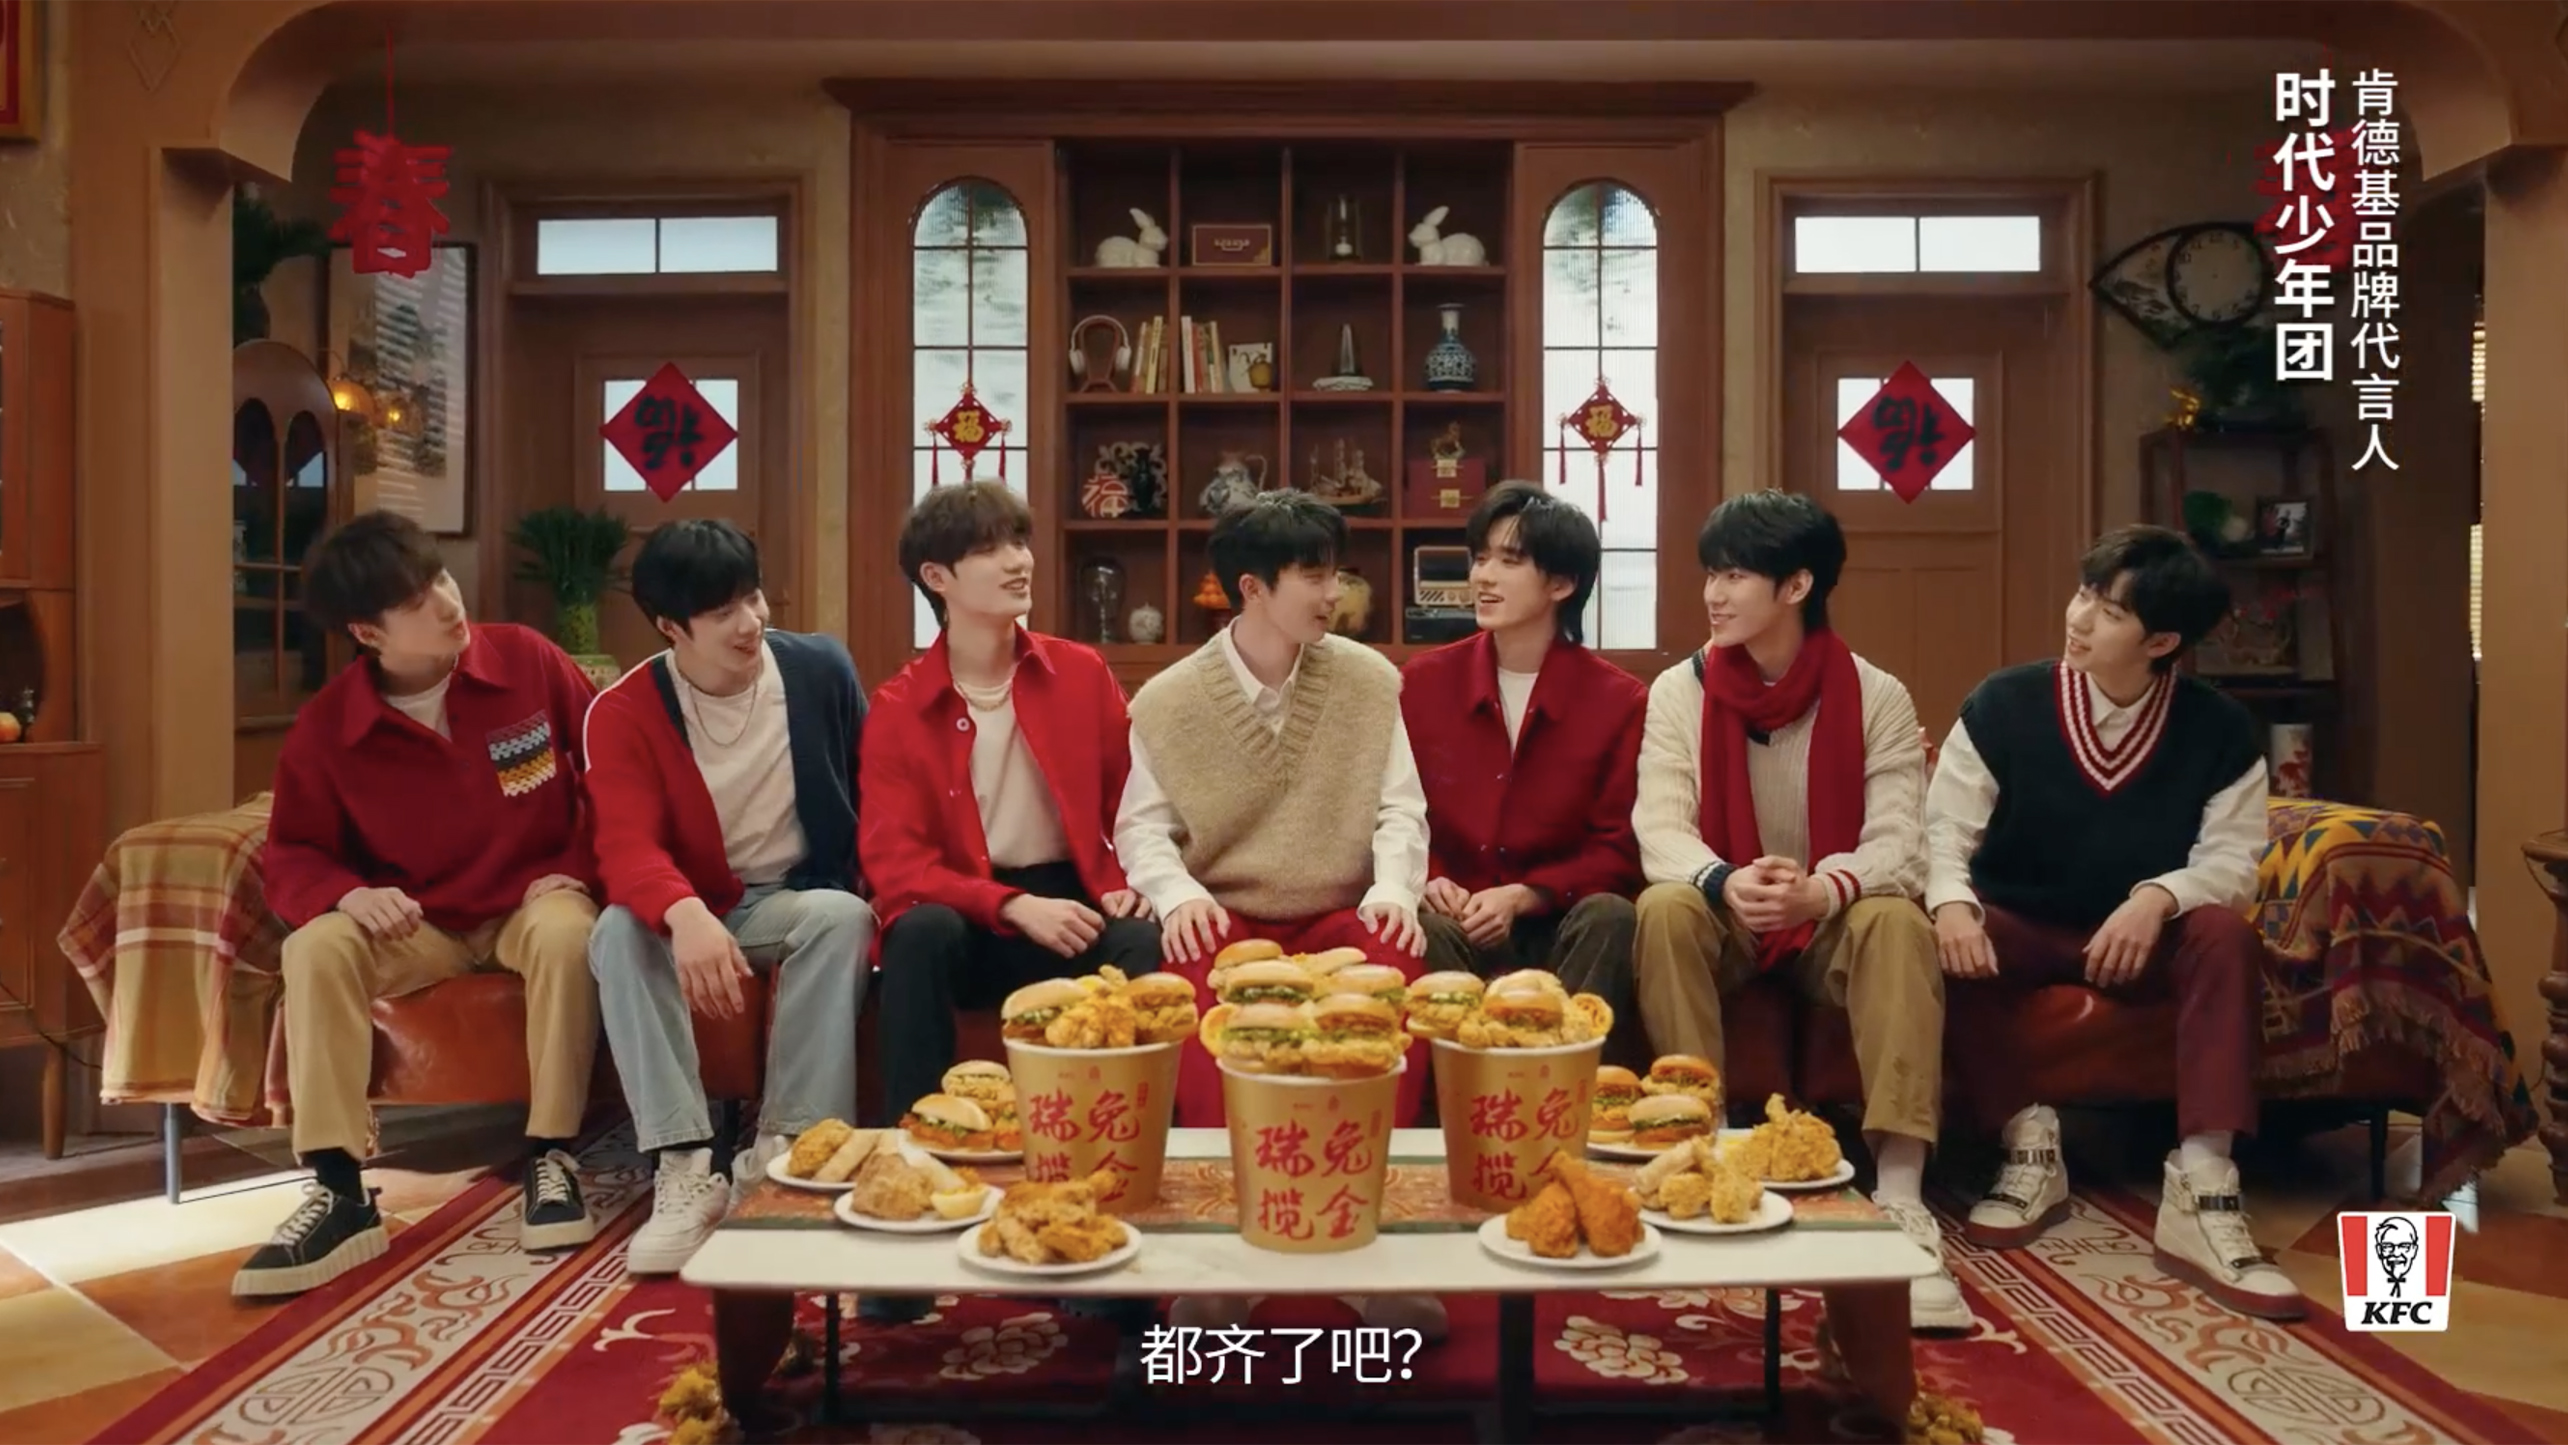 Still from KFC Lunar New Year Campaign with TNT (Teens in Times)